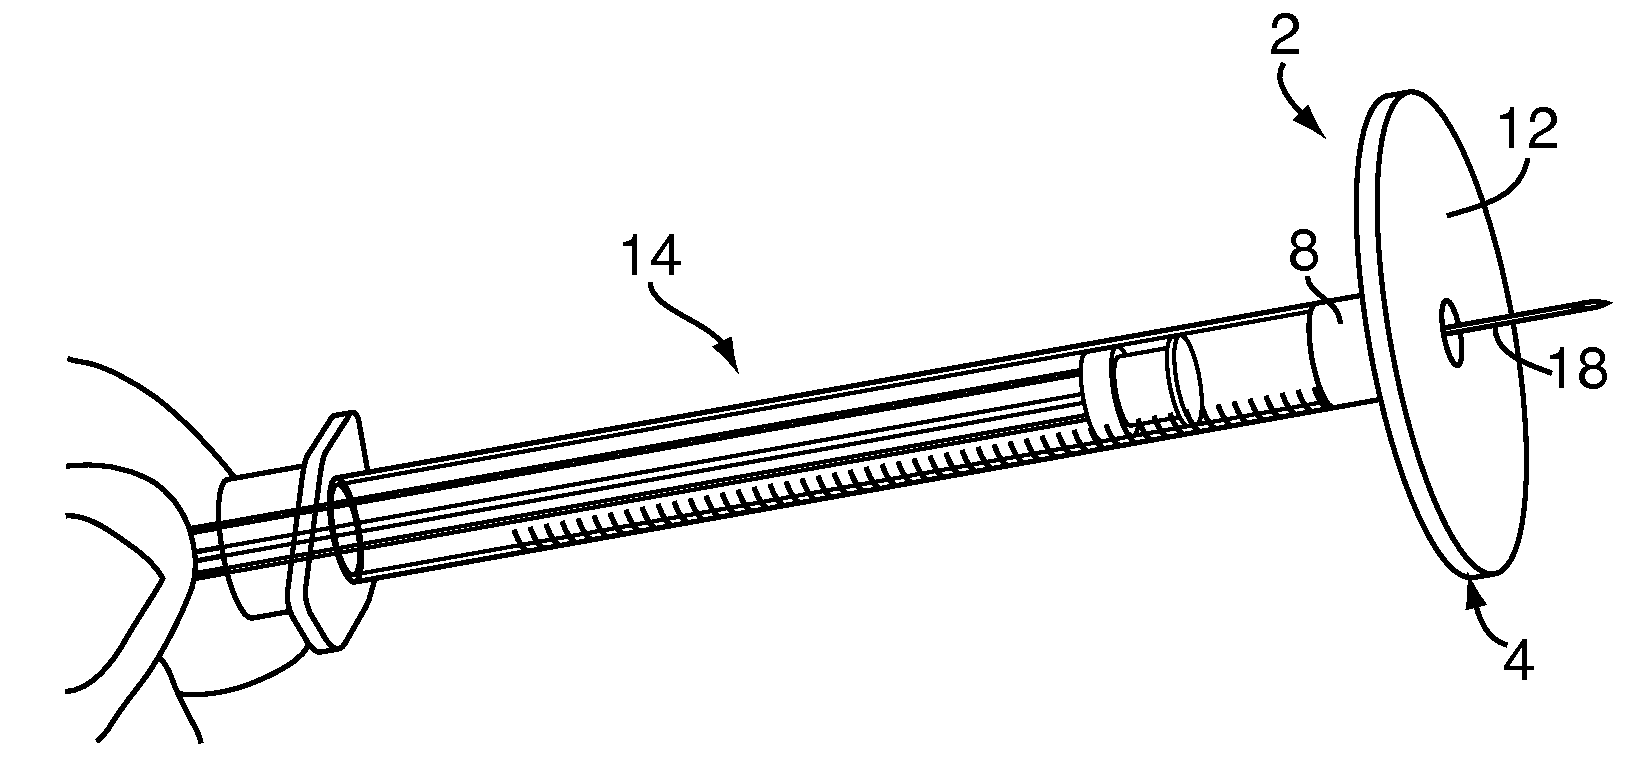 Injection aid and stability disk for syringe or insulin pen